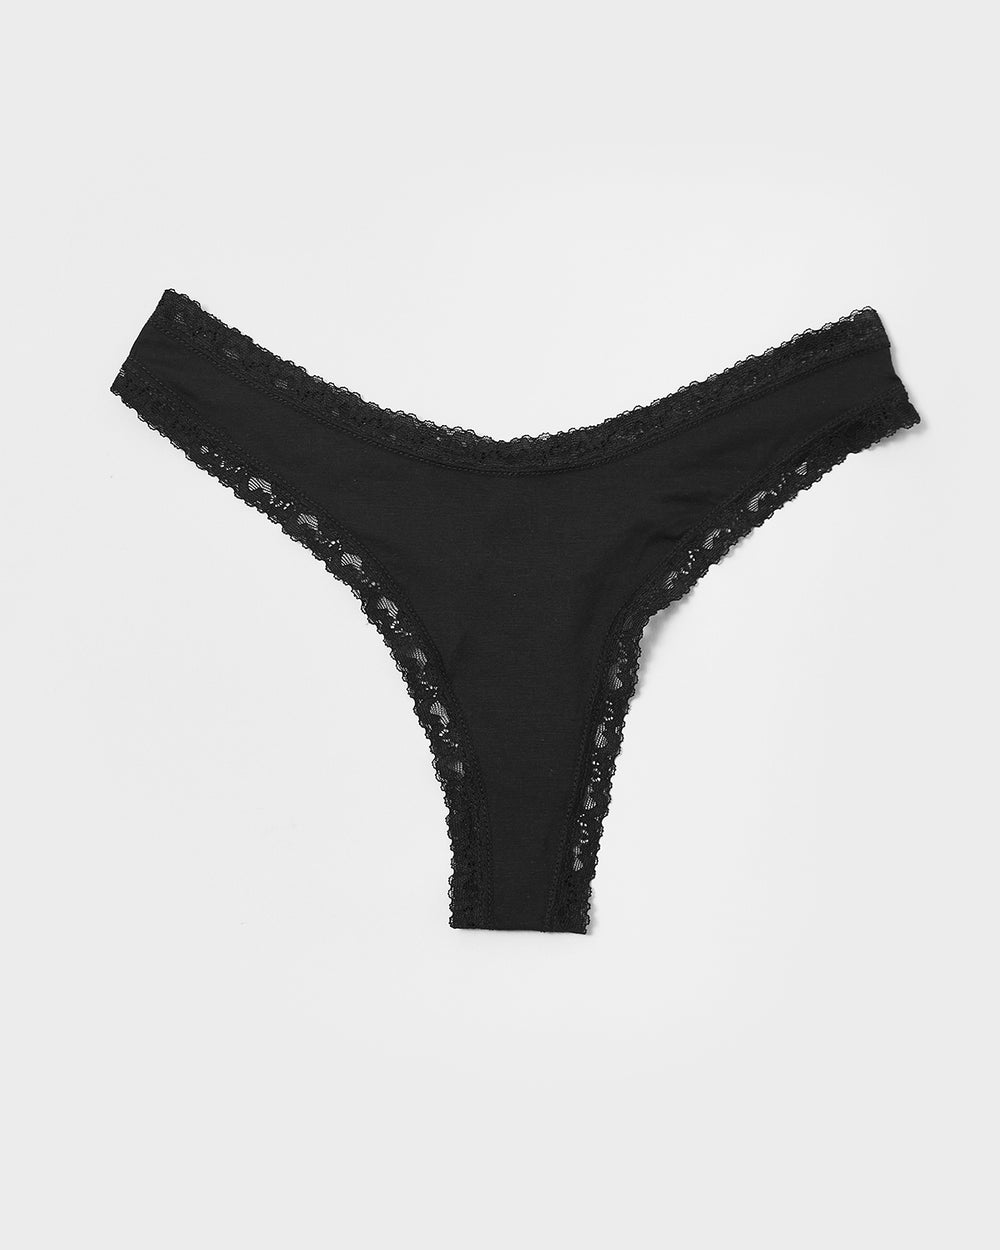 Buy 3-pack lace thong briefs online in Egypt